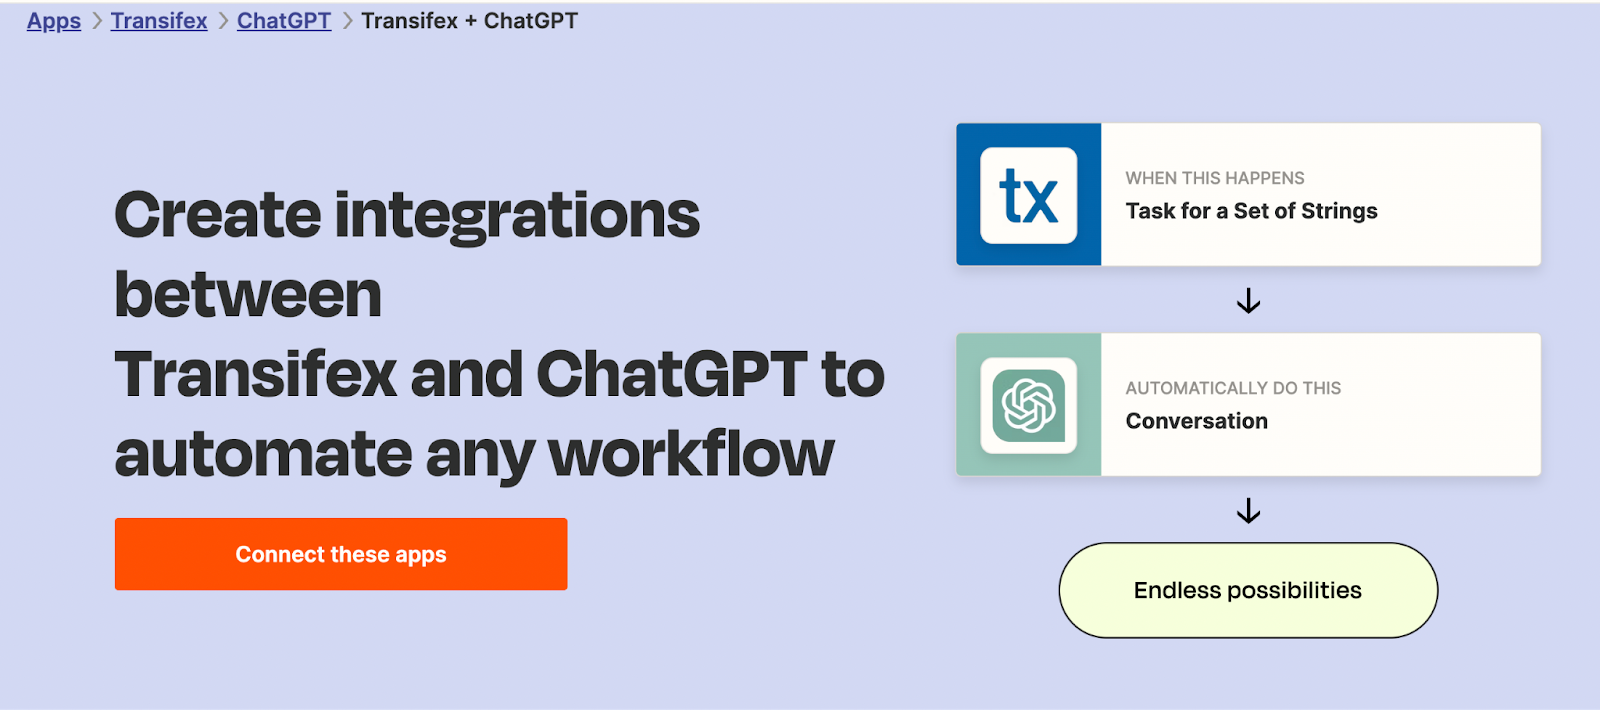 zappier website translation with chatgpt